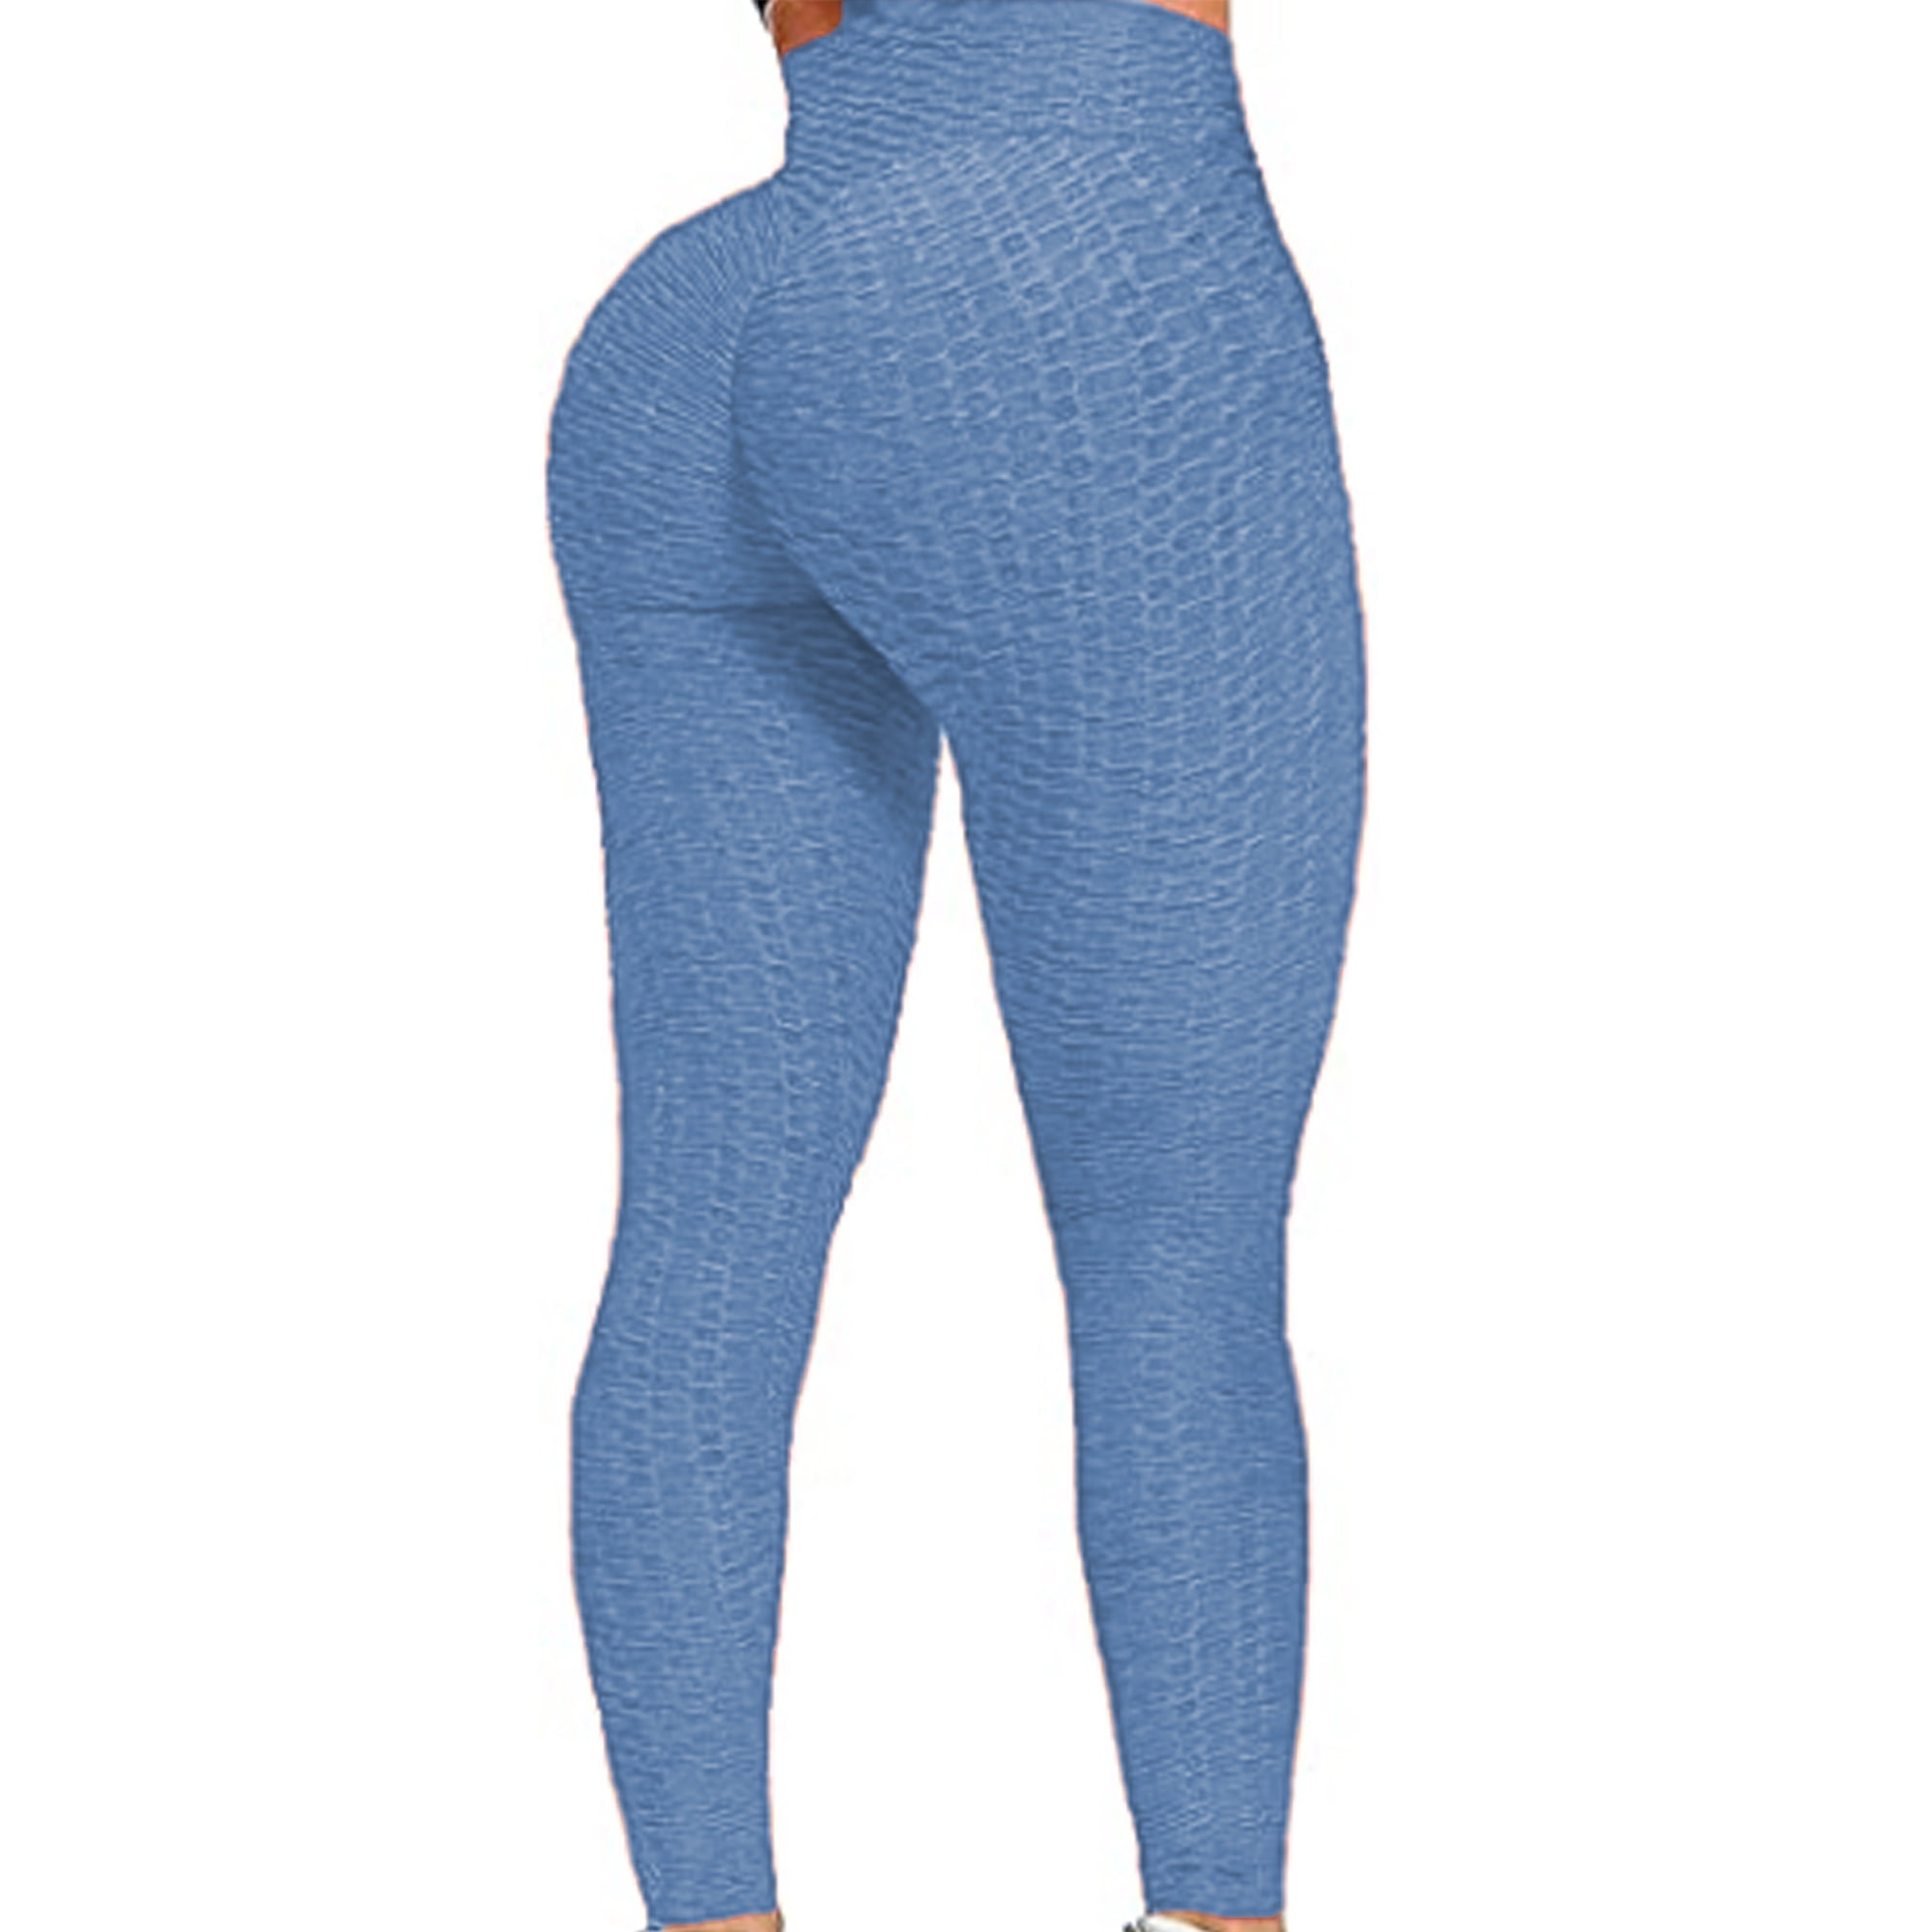 Fittoo Women Booty Yoga Pants Women High Waisted Ruched Butt Lift